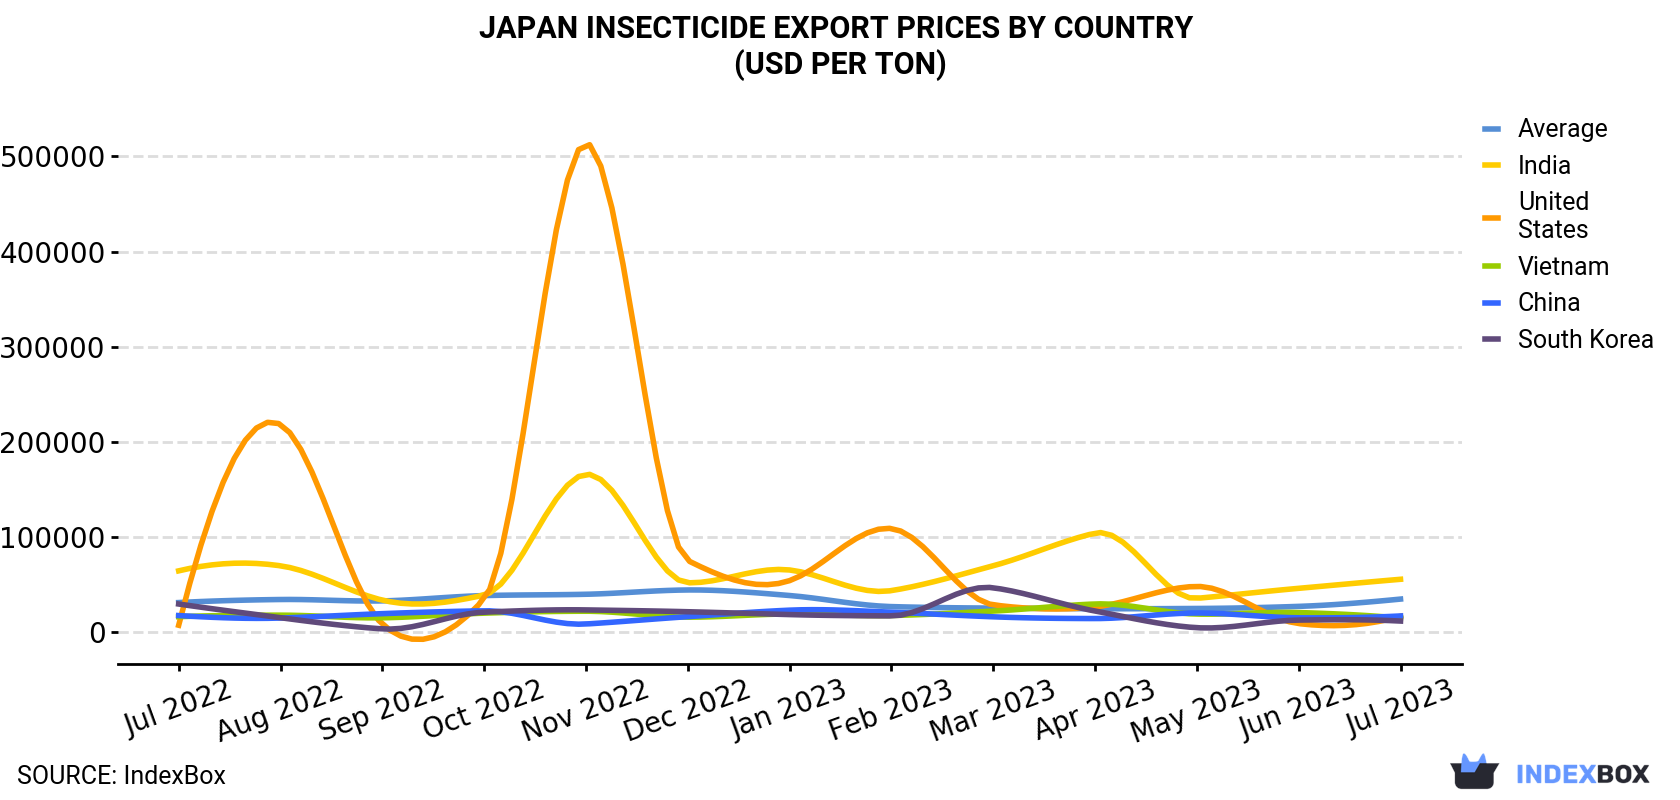 Japan Insecticide Export Prices By Country (USD Per Ton)